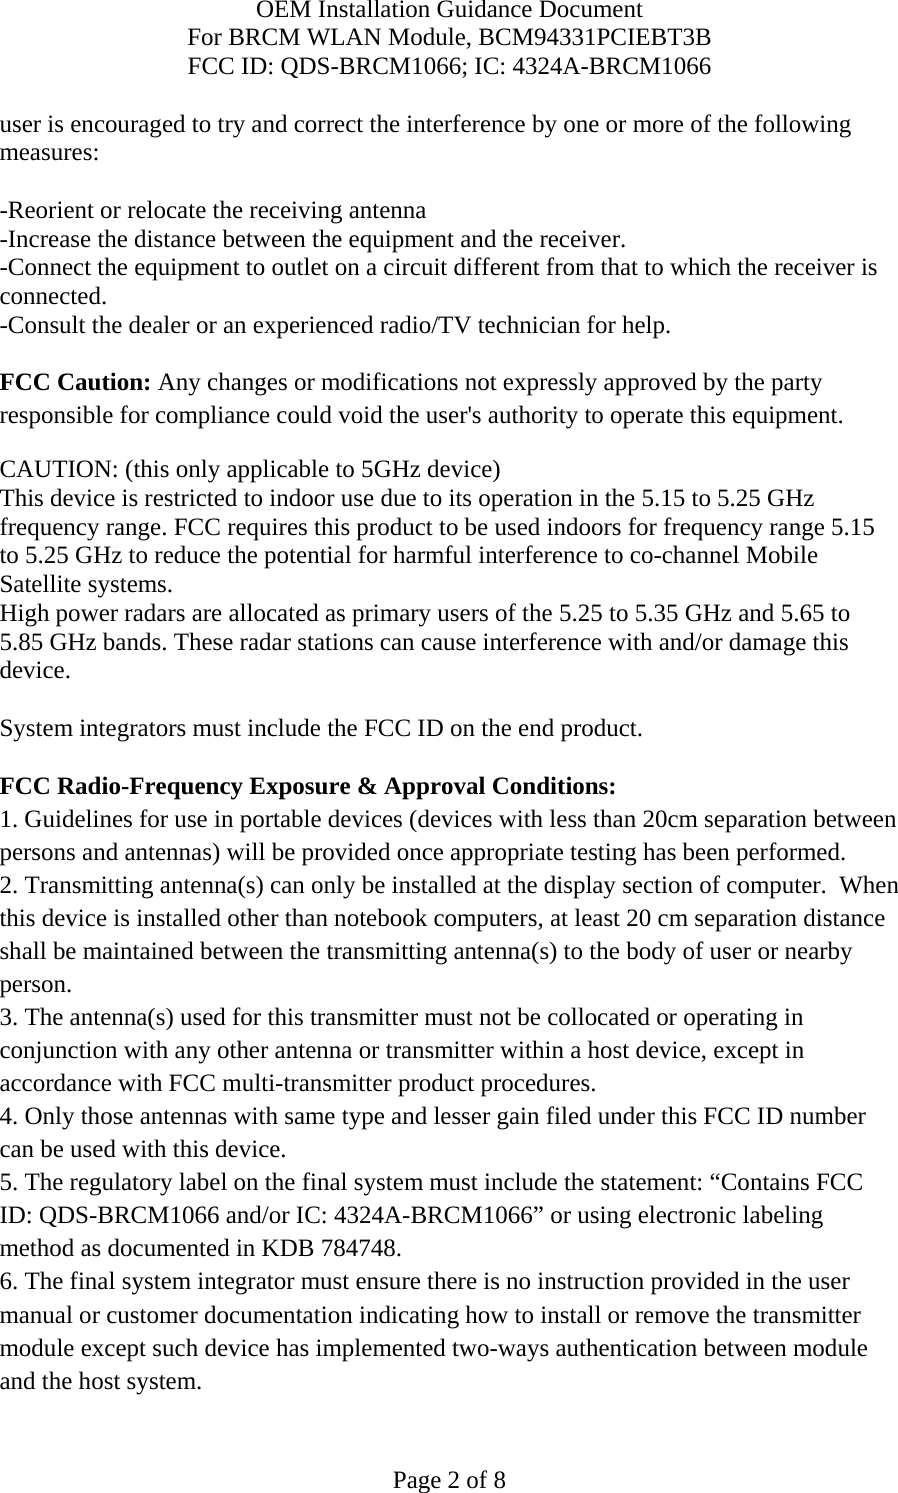 OEM Installation Guidance Document For BRCM WLAN Module, BCM94331PCIEBT3B FCC ID: QDS-BRCM1066; IC: 4324A-BRCM1066  Page 2 of 8 user is encouraged to try and correct the interference by one or more of the following measures:   -Reorient or relocate the receiving antenna -Increase the distance between the equipment and the receiver. -Connect the equipment to outlet on a circuit different from that to which the receiver is connected. -Consult the dealer or an experienced radio/TV technician for help.  FCC Caution: Any changes or modifications not expressly approved by the party responsible for compliance could void the user&apos;s authority to operate this equipment. CAUTION: (this only applicable to 5GHz device) This device is restricted to indoor use due to its operation in the 5.15 to 5.25 GHz frequency range. FCC requires this product to be used indoors for frequency range 5.15 to 5.25 GHz to reduce the potential for harmful interference to co-channel Mobile Satellite systems. High power radars are allocated as primary users of the 5.25 to 5.35 GHz and 5.65 to 5.85 GHz bands. These radar stations can cause interference with and/or damage this device.  System integrators must include the FCC ID on the end product.   FCC Radio-Frequency Exposure &amp; Approval Conditions: 1. Guidelines for use in portable devices (devices with less than 20cm separation between persons and antennas) will be provided once appropriate testing has been performed. 2. Transmitting antenna(s) can only be installed at the display section of computer.  When this device is installed other than notebook computers, at least 20 cm separation distance shall be maintained between the transmitting antenna(s) to the body of user or nearby person. 3. The antenna(s) used for this transmitter must not be collocated or operating in conjunction with any other antenna or transmitter within a host device, except in accordance with FCC multi-transmitter product procedures. 4. Only those antennas with same type and lesser gain filed under this FCC ID number can be used with this device. 5. The regulatory label on the final system must include the statement: “Contains FCC ID: QDS-BRCM1066 and/or IC: 4324A-BRCM1066” or using electronic labeling method as documented in KDB 784748. 6. The final system integrator must ensure there is no instruction provided in the user manual or customer documentation indicating how to install or remove the transmitter module except such device has implemented two-ways authentication between module and the host system. 